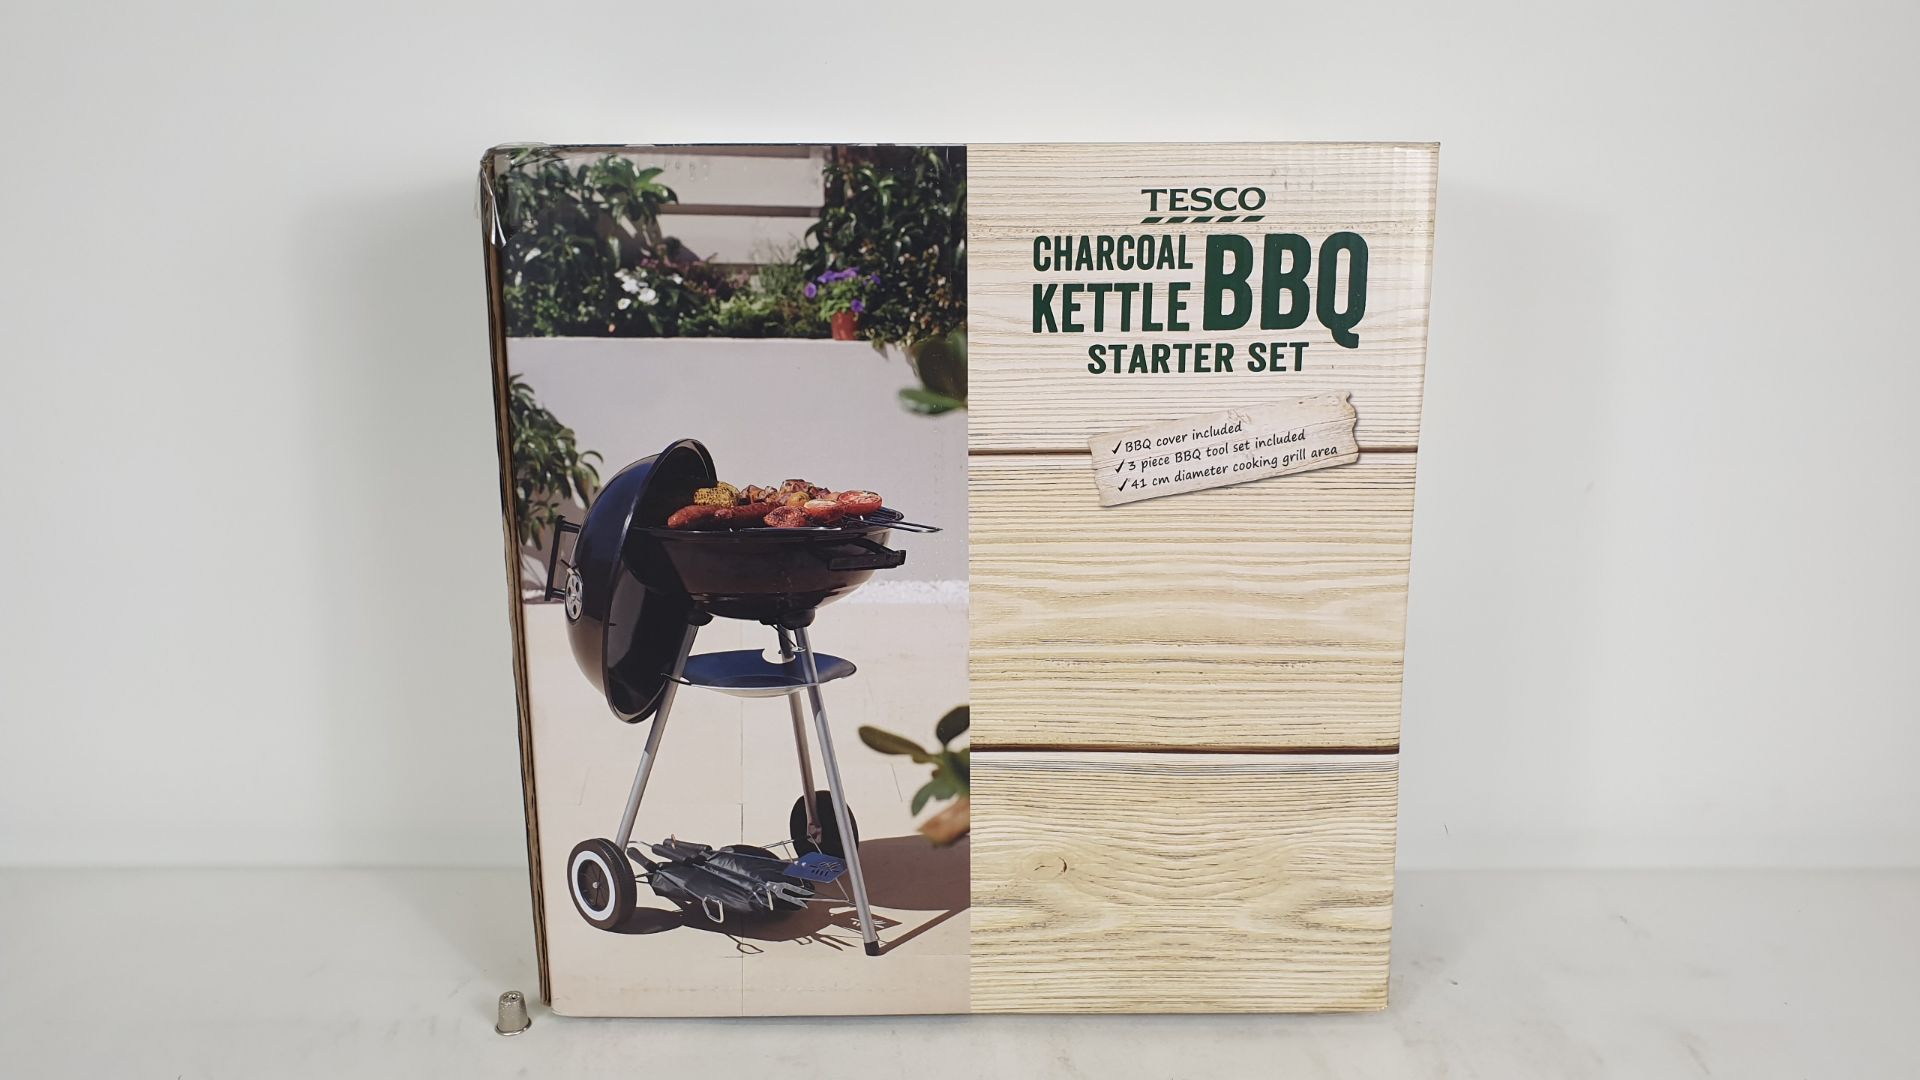 8 X TESCO CHARCOAL KETTLE BARBEQUE STARTER SETS ( INCLUDES BBQ, GRILL AREA 41CM DIAM, 3PC TOOLS